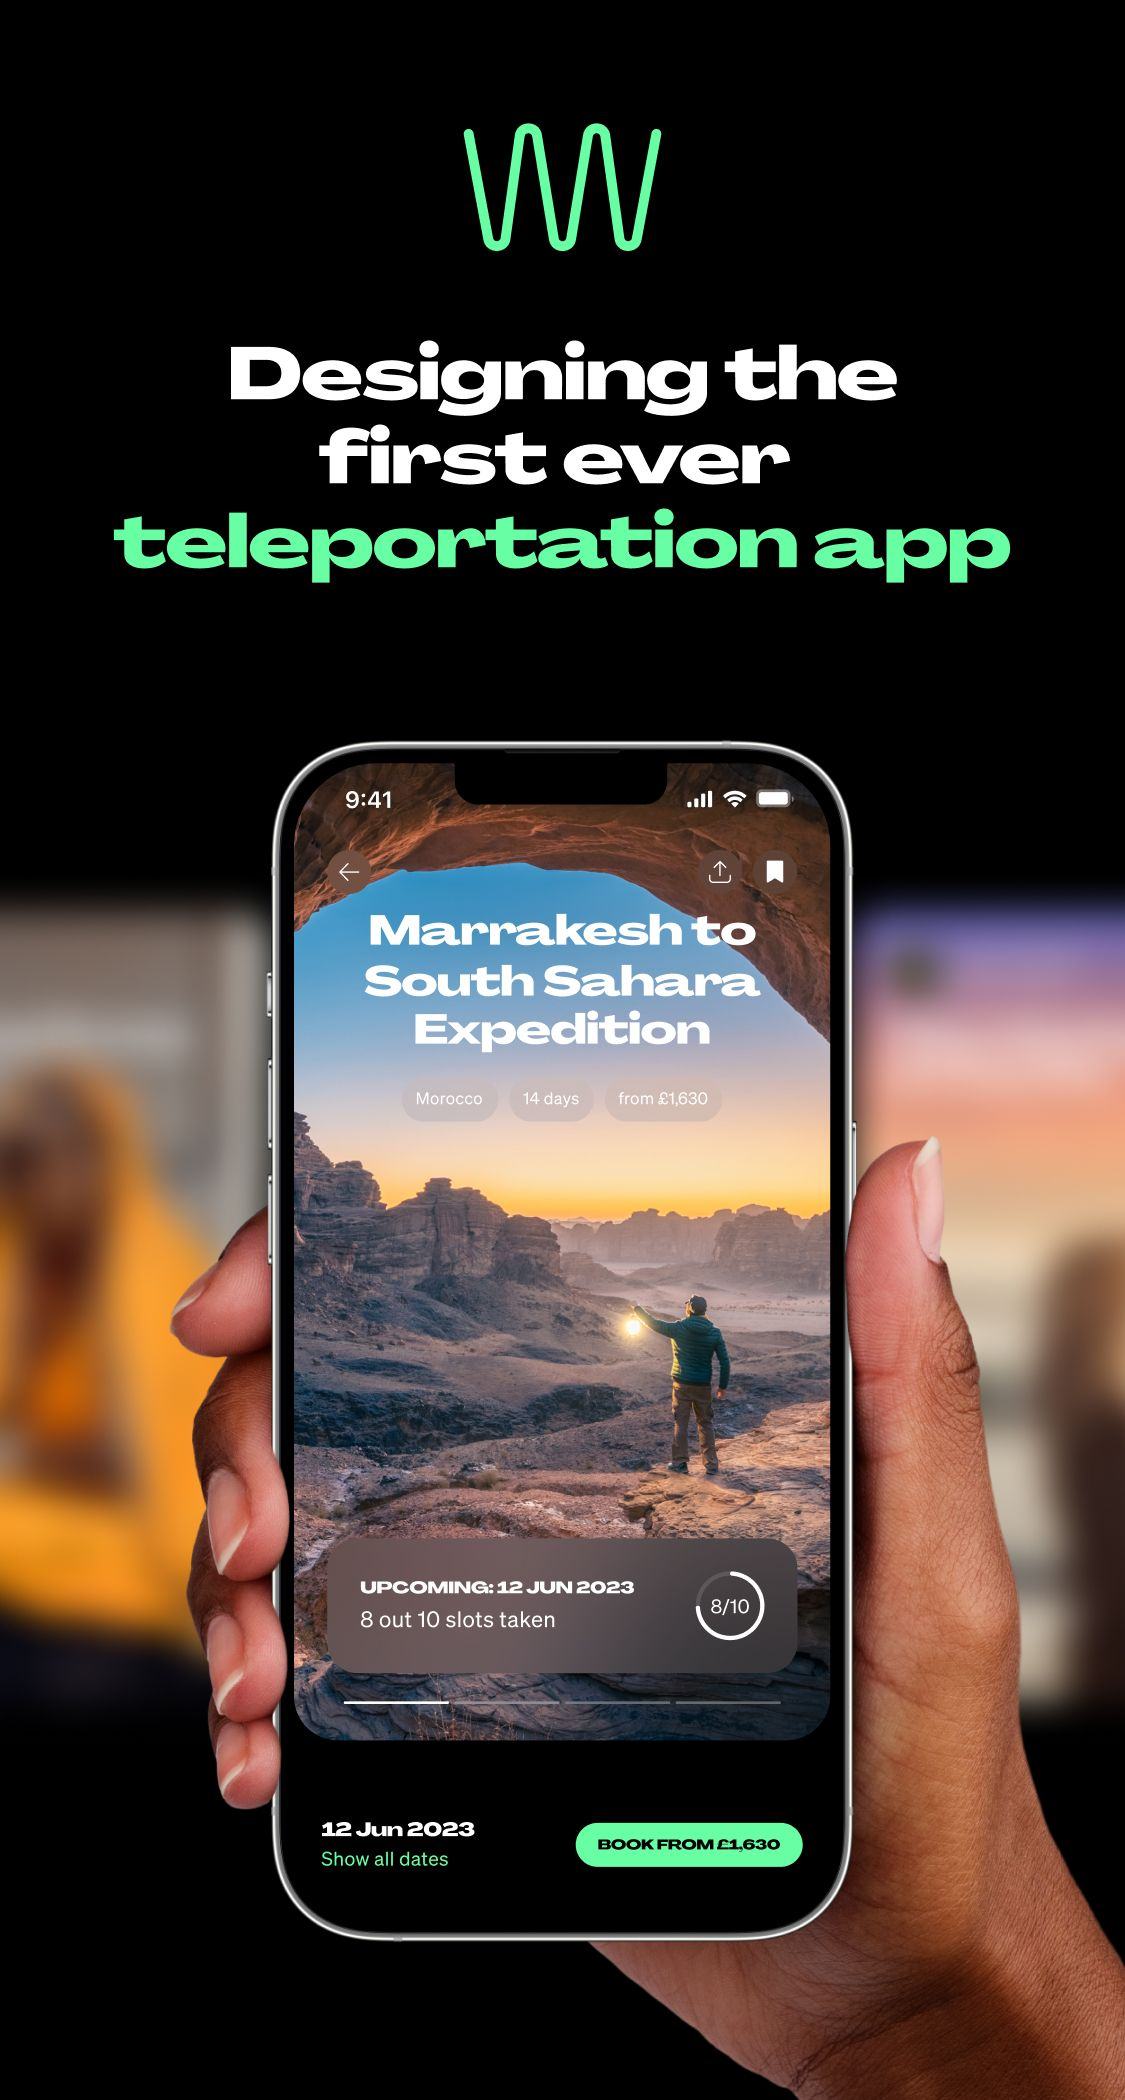 Designing the first ever teleportation app for adventure seekers